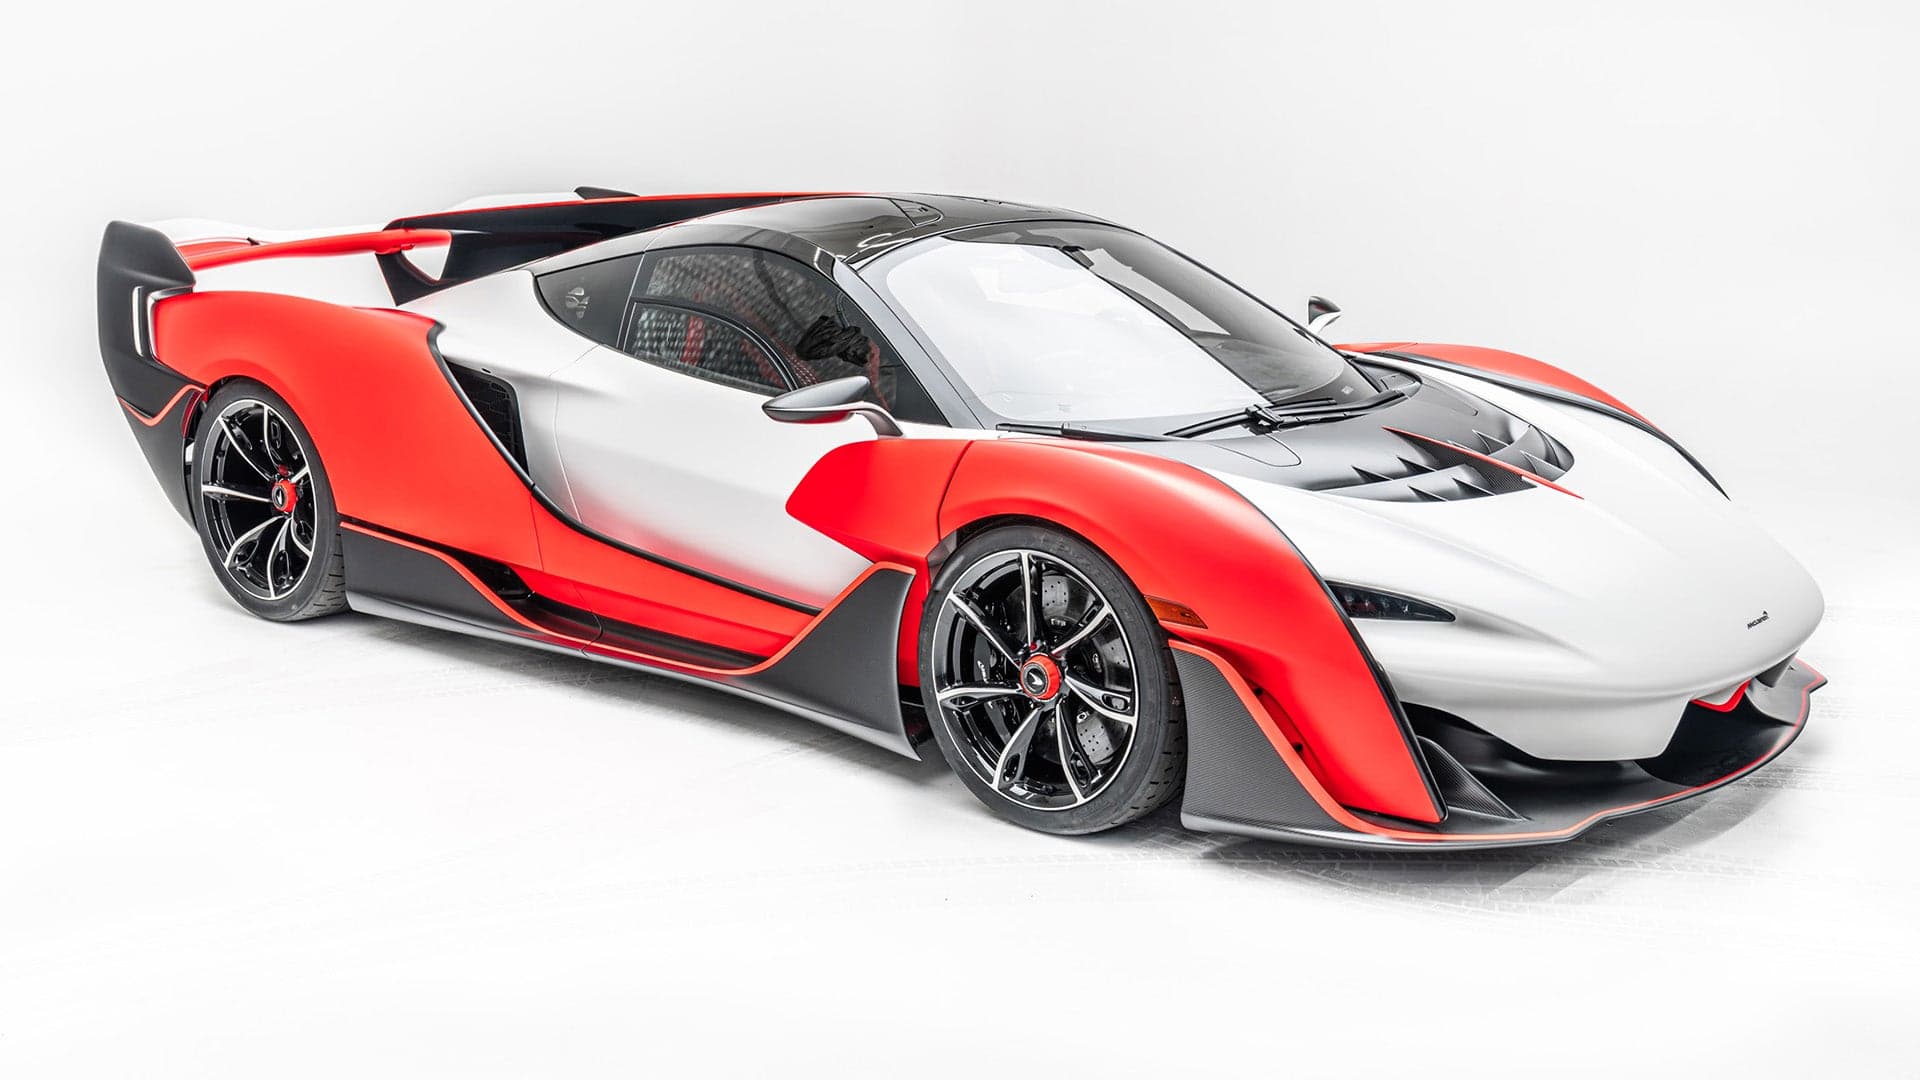 The 218-MPH McLaren Sabre Is an Aero-Focused Weapon That’s Only for the US